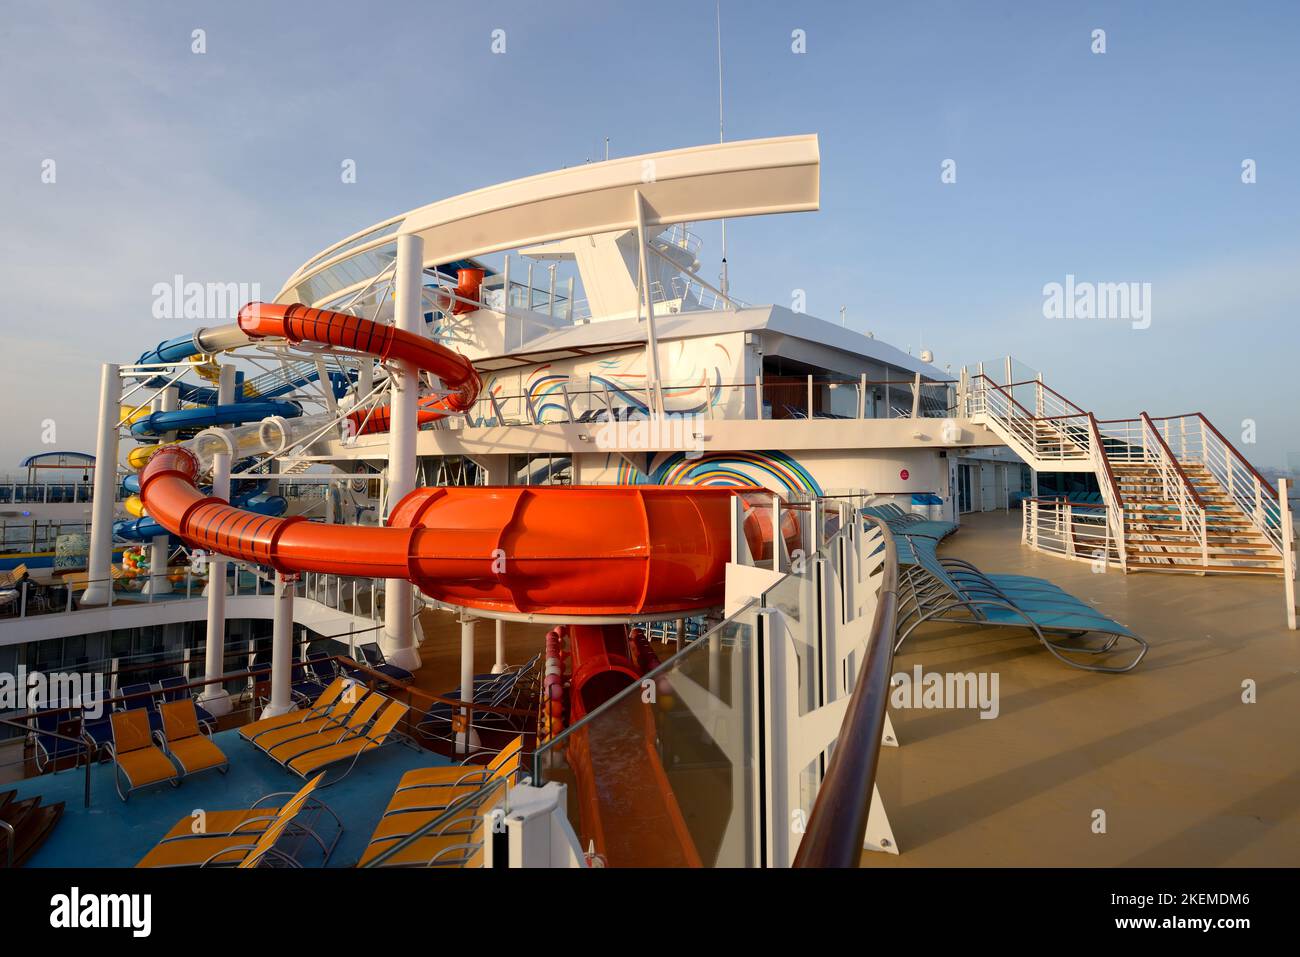 The Wonder of the Seas, the largest cruise ship in the world in 2022. Stock Photo